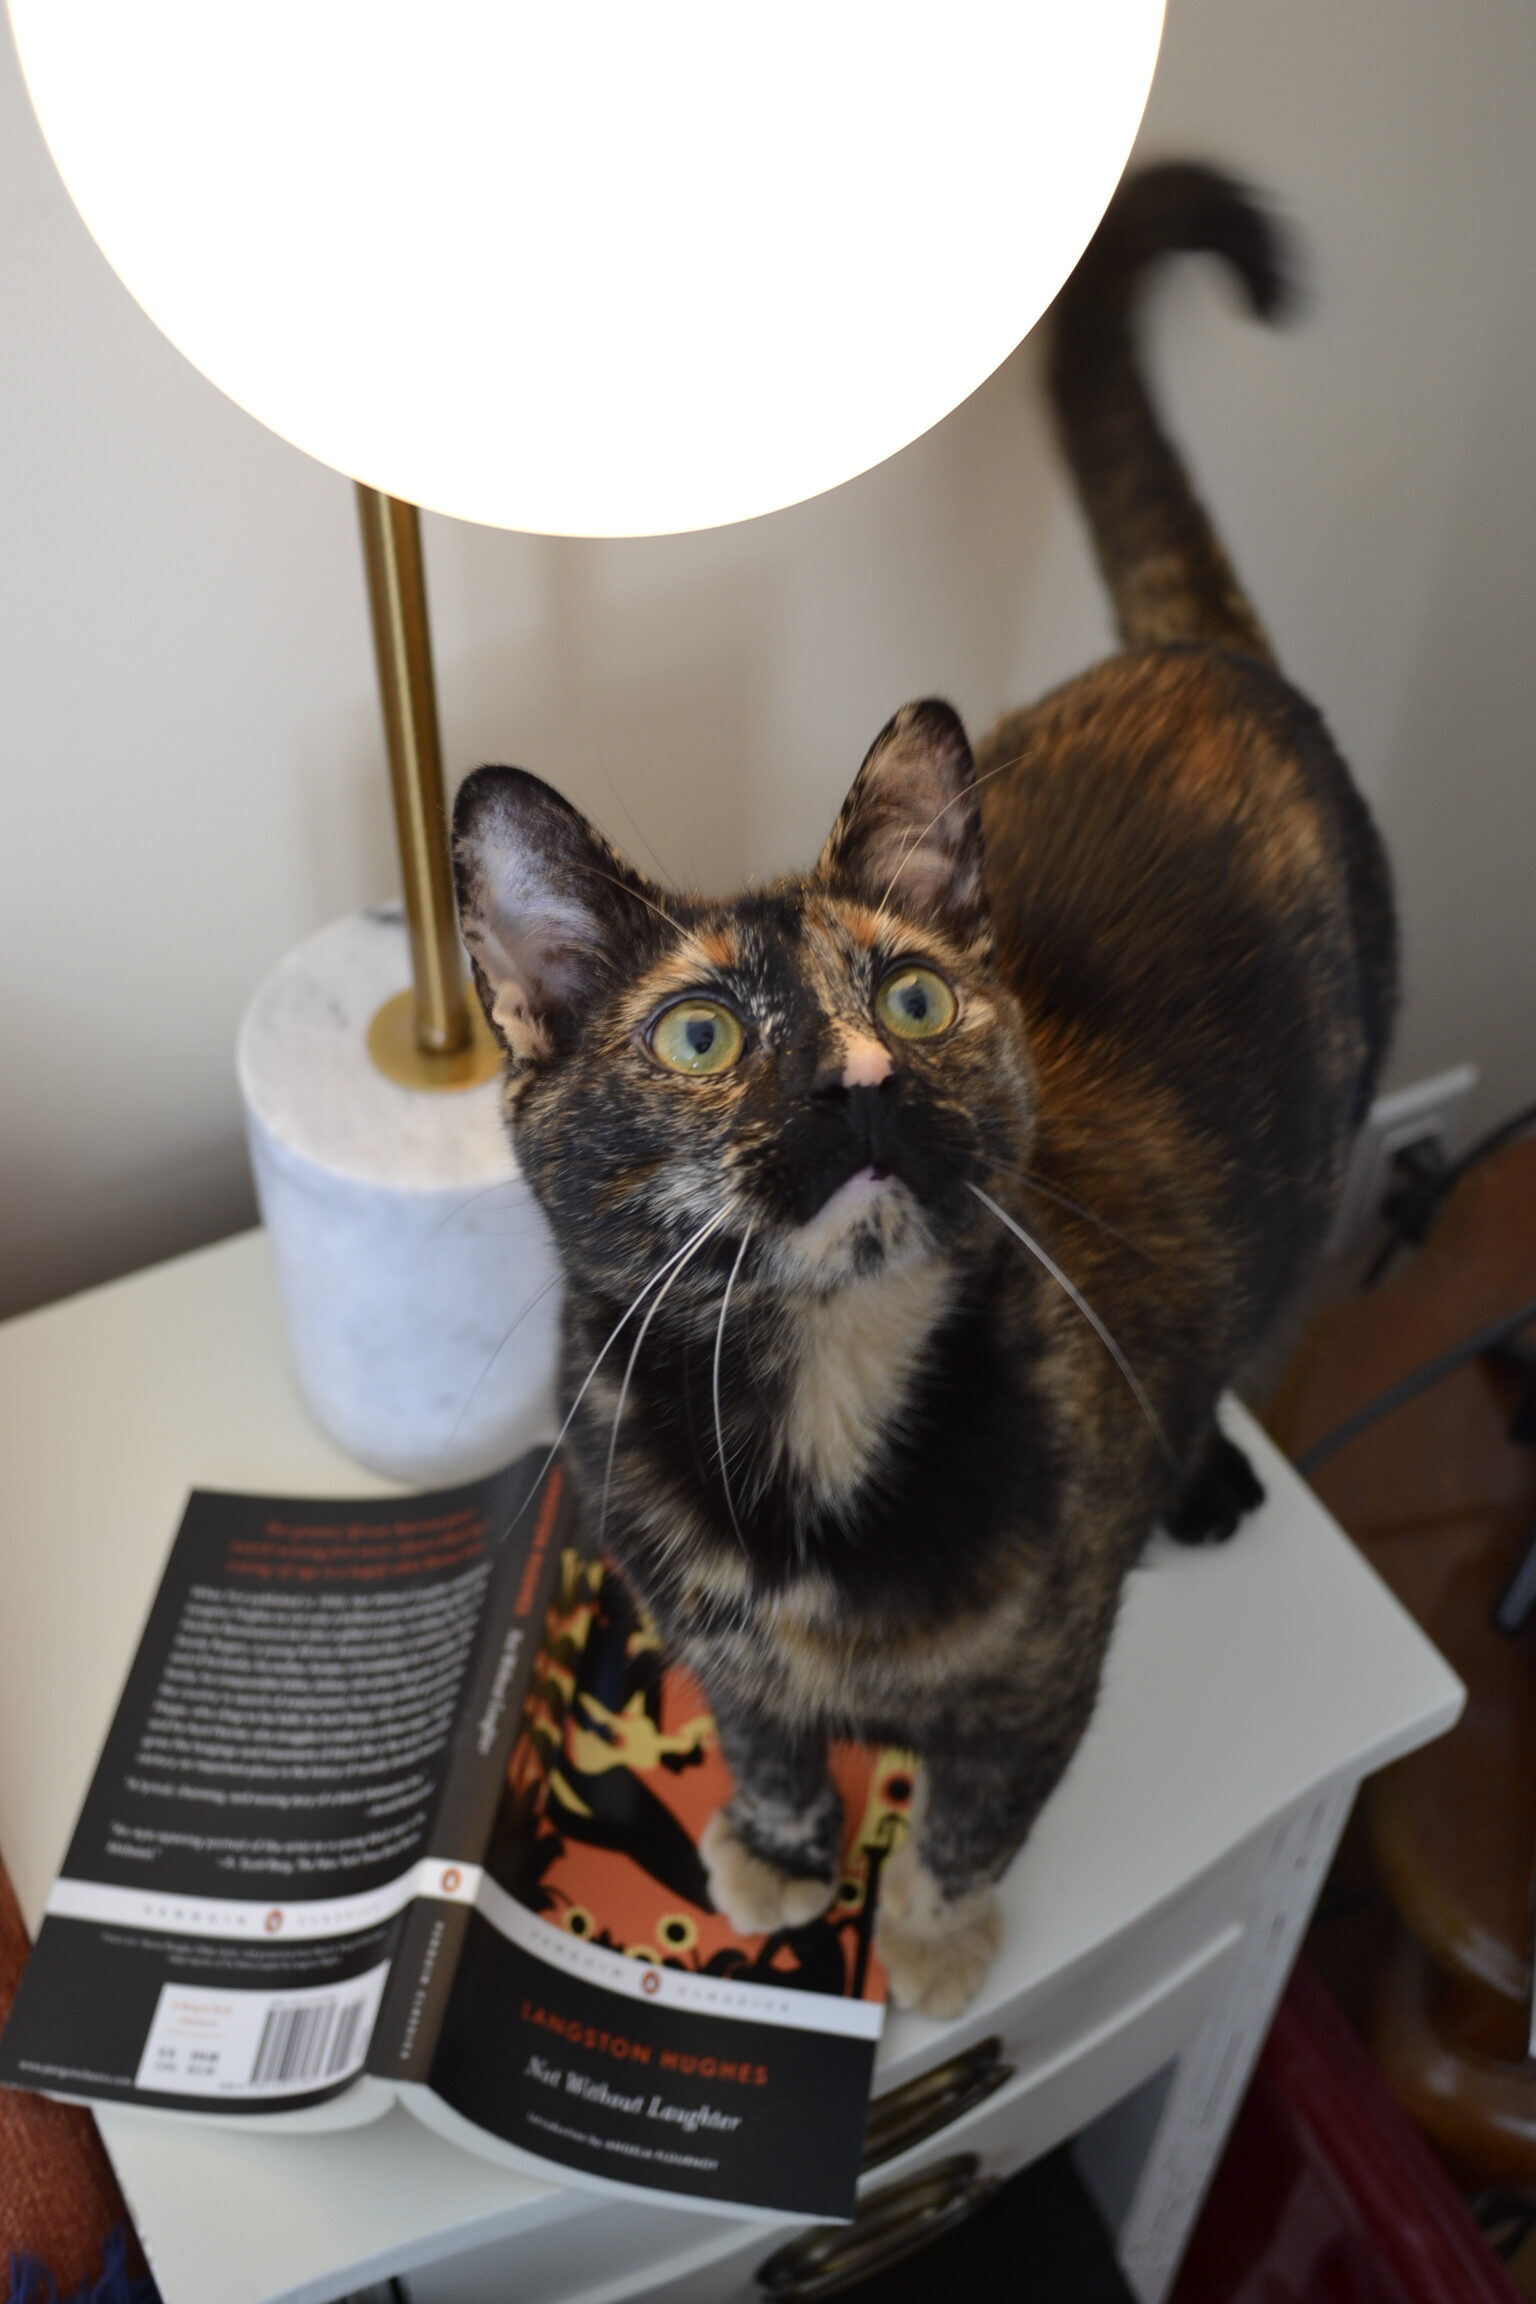 A tortoiseshell kitten stands on Not Without Laughter and looks up at a 'moon' lamp.